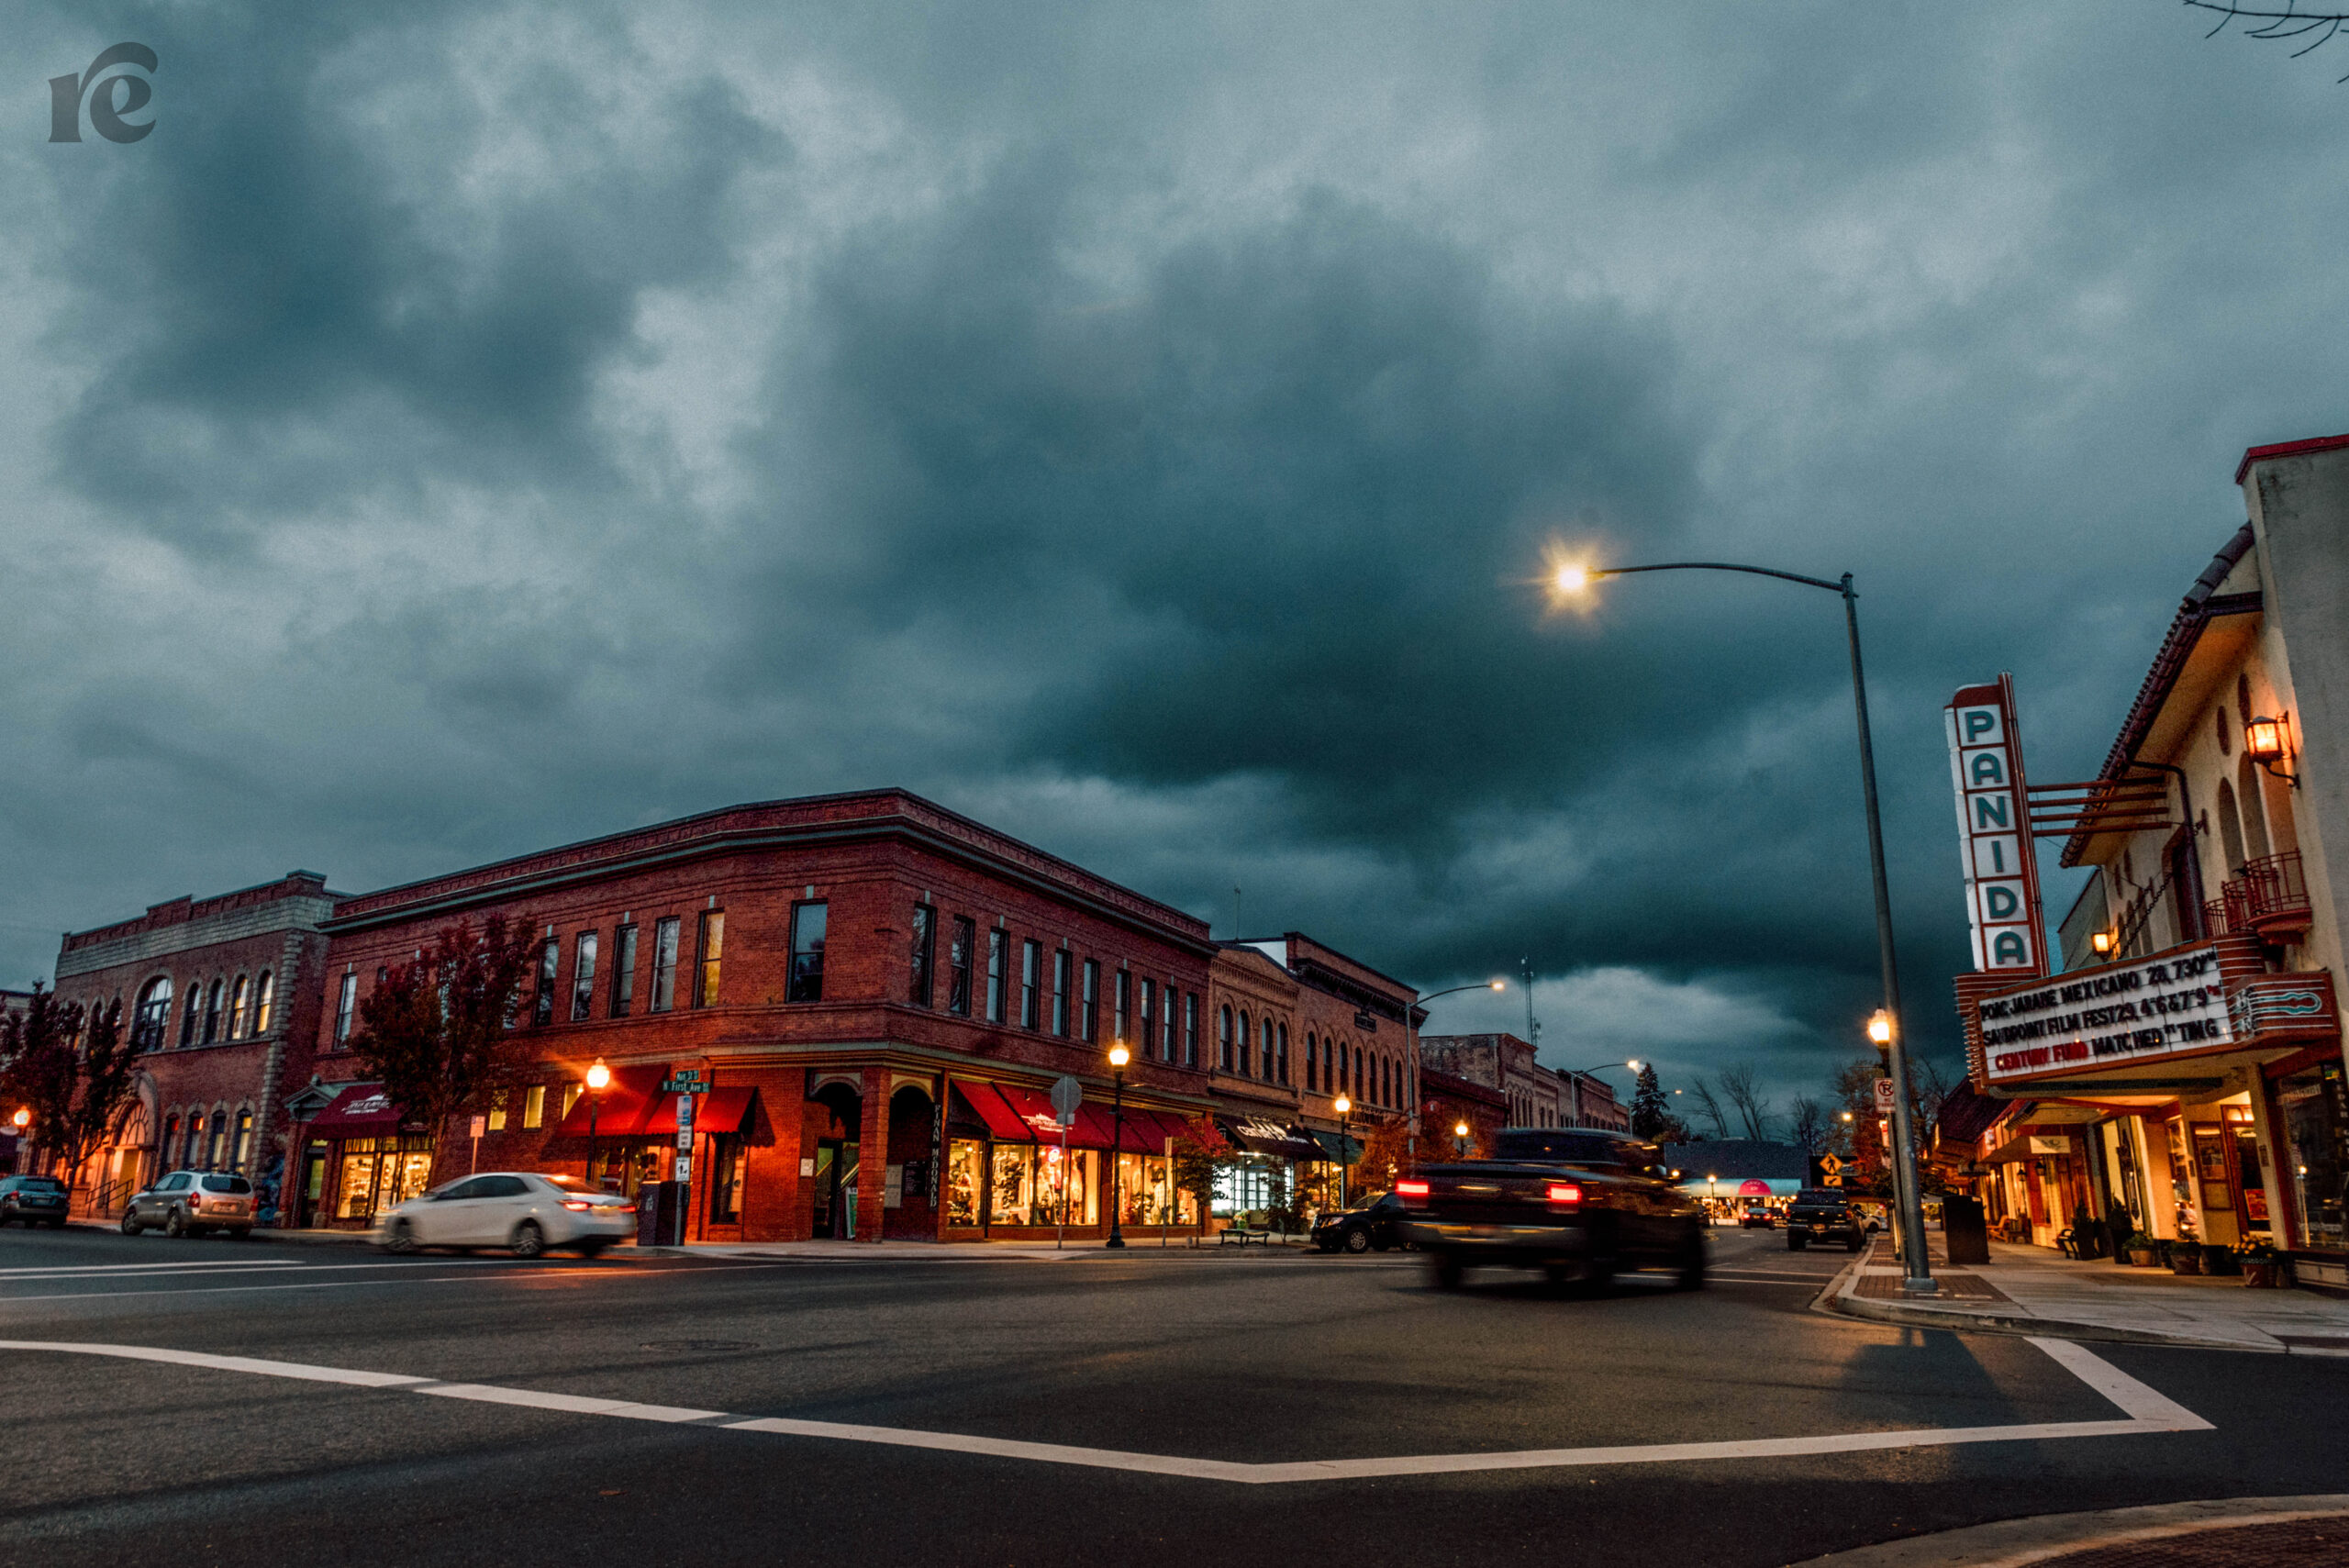 Downtown Sandpoint, Idaho light up in the evening